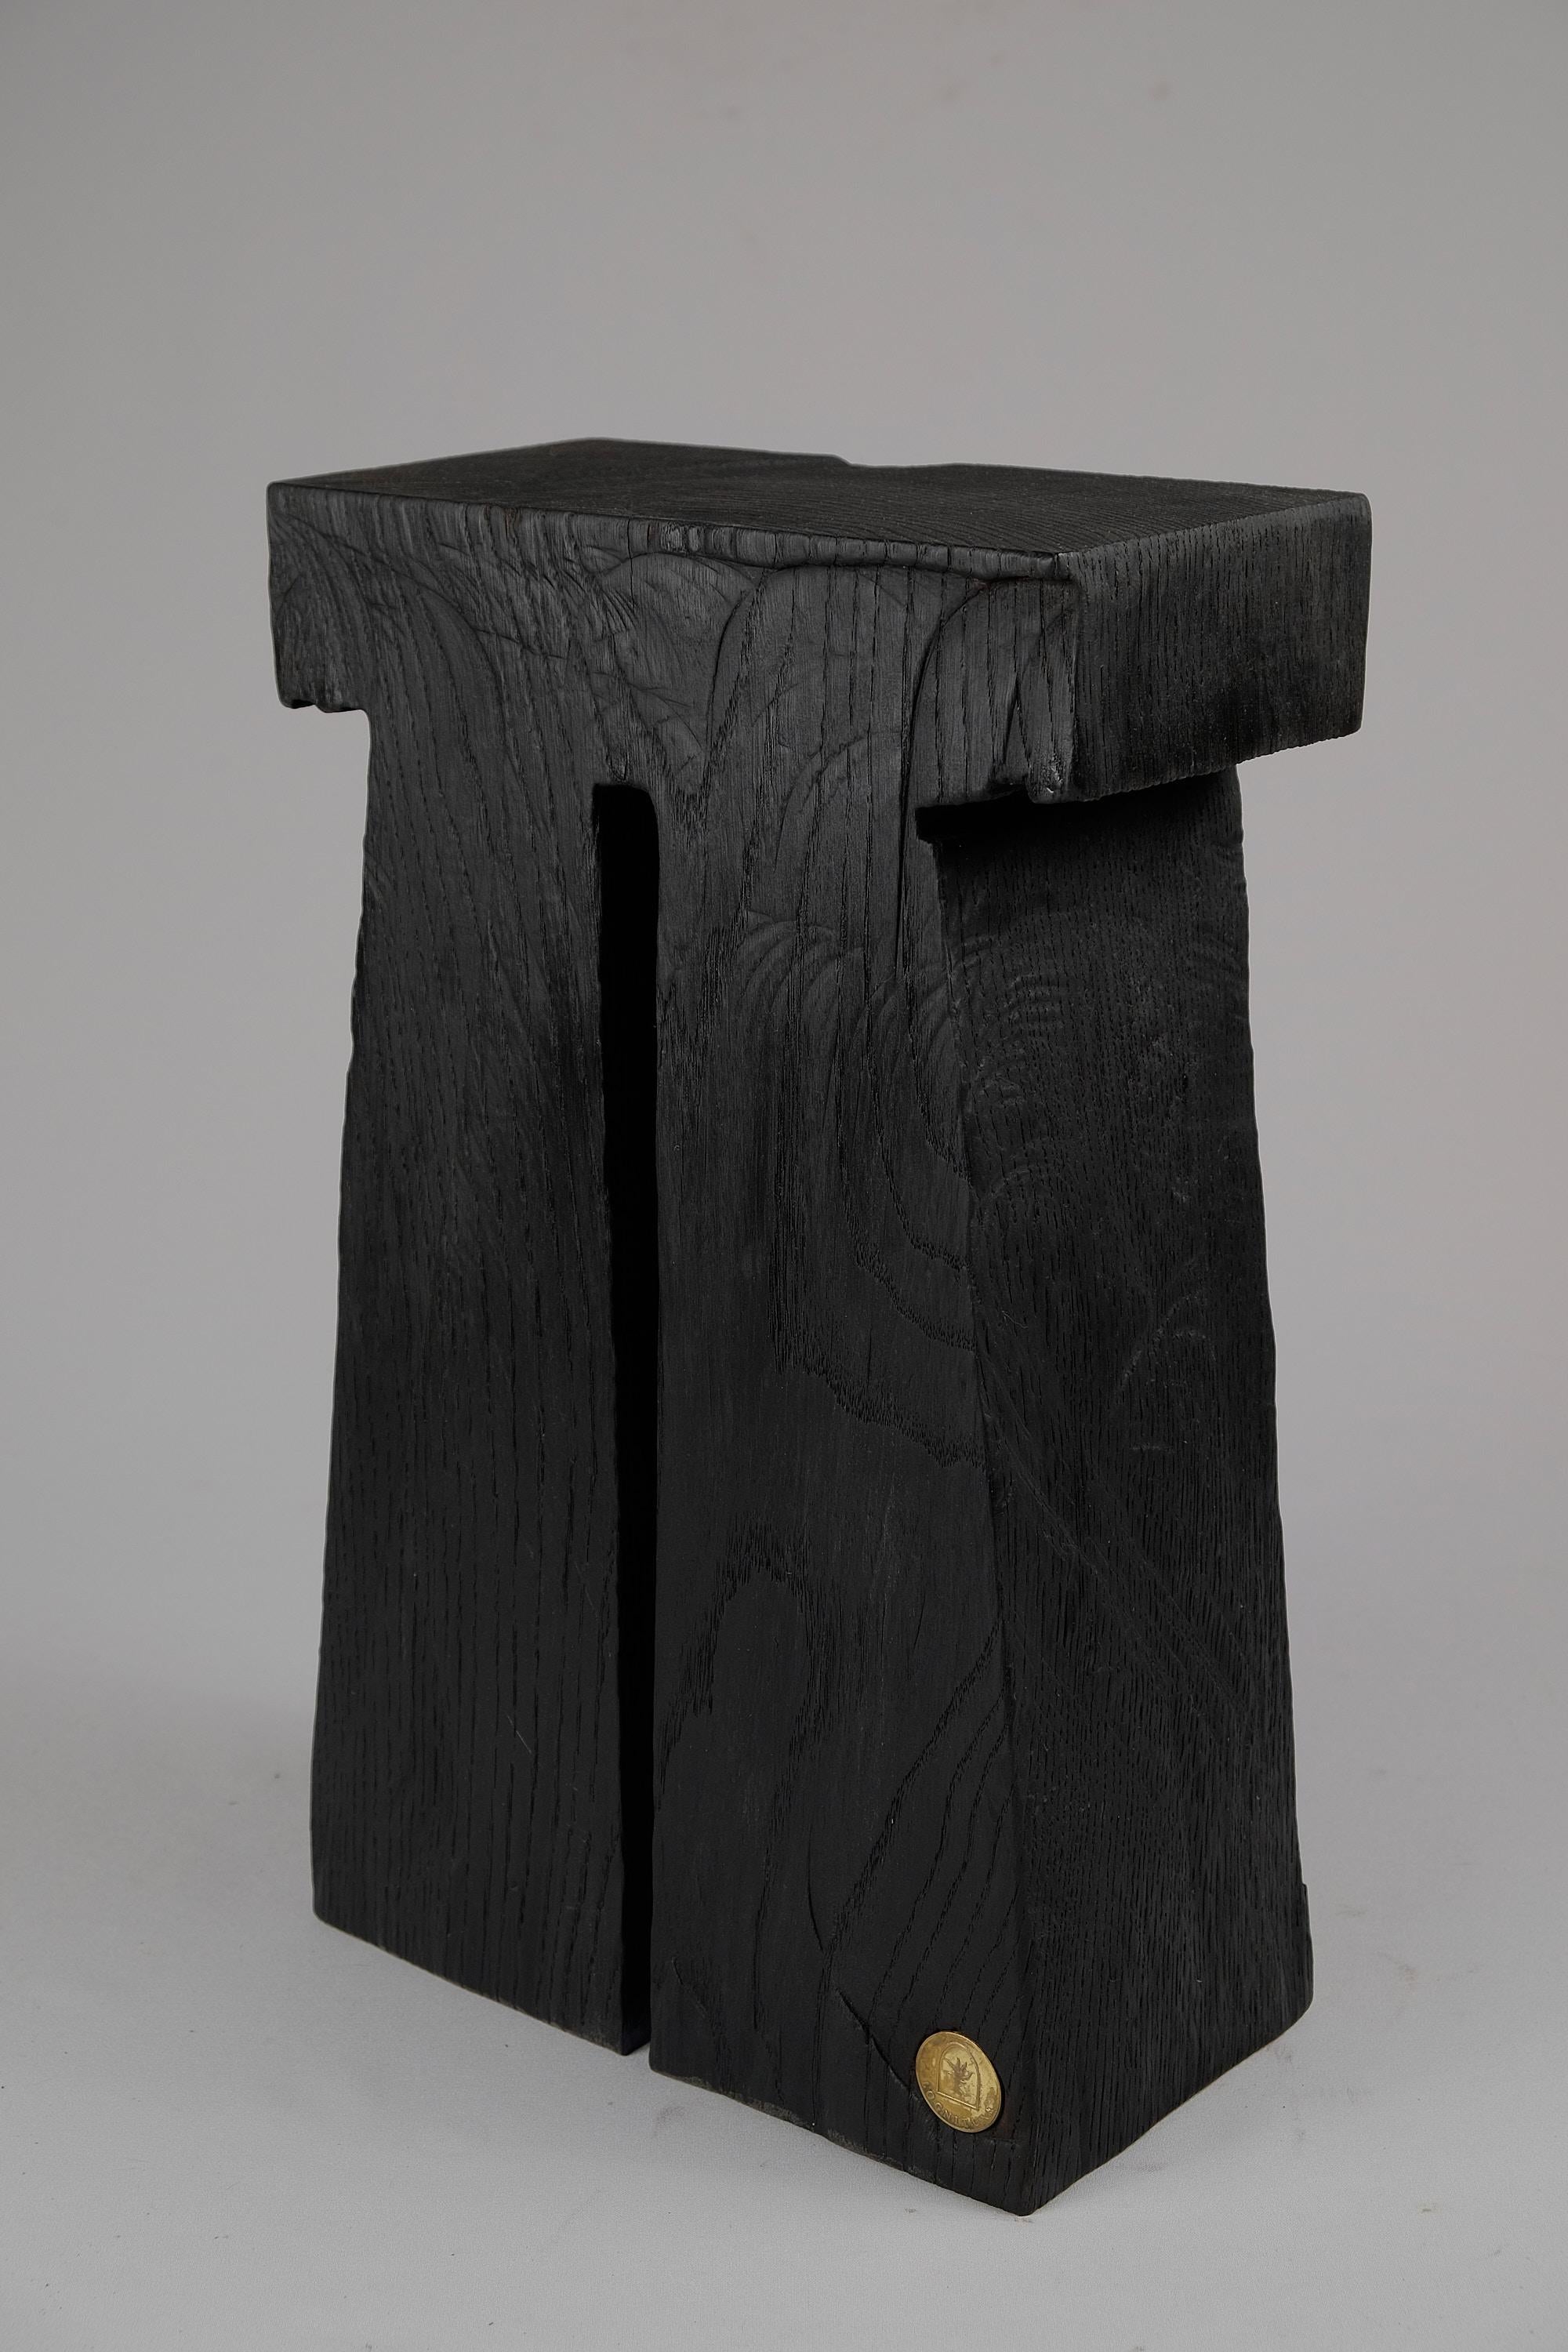 Croatian Solid Burnt Wood, Side Table, Stool, Original Contemporary Design, Logniture For Sale